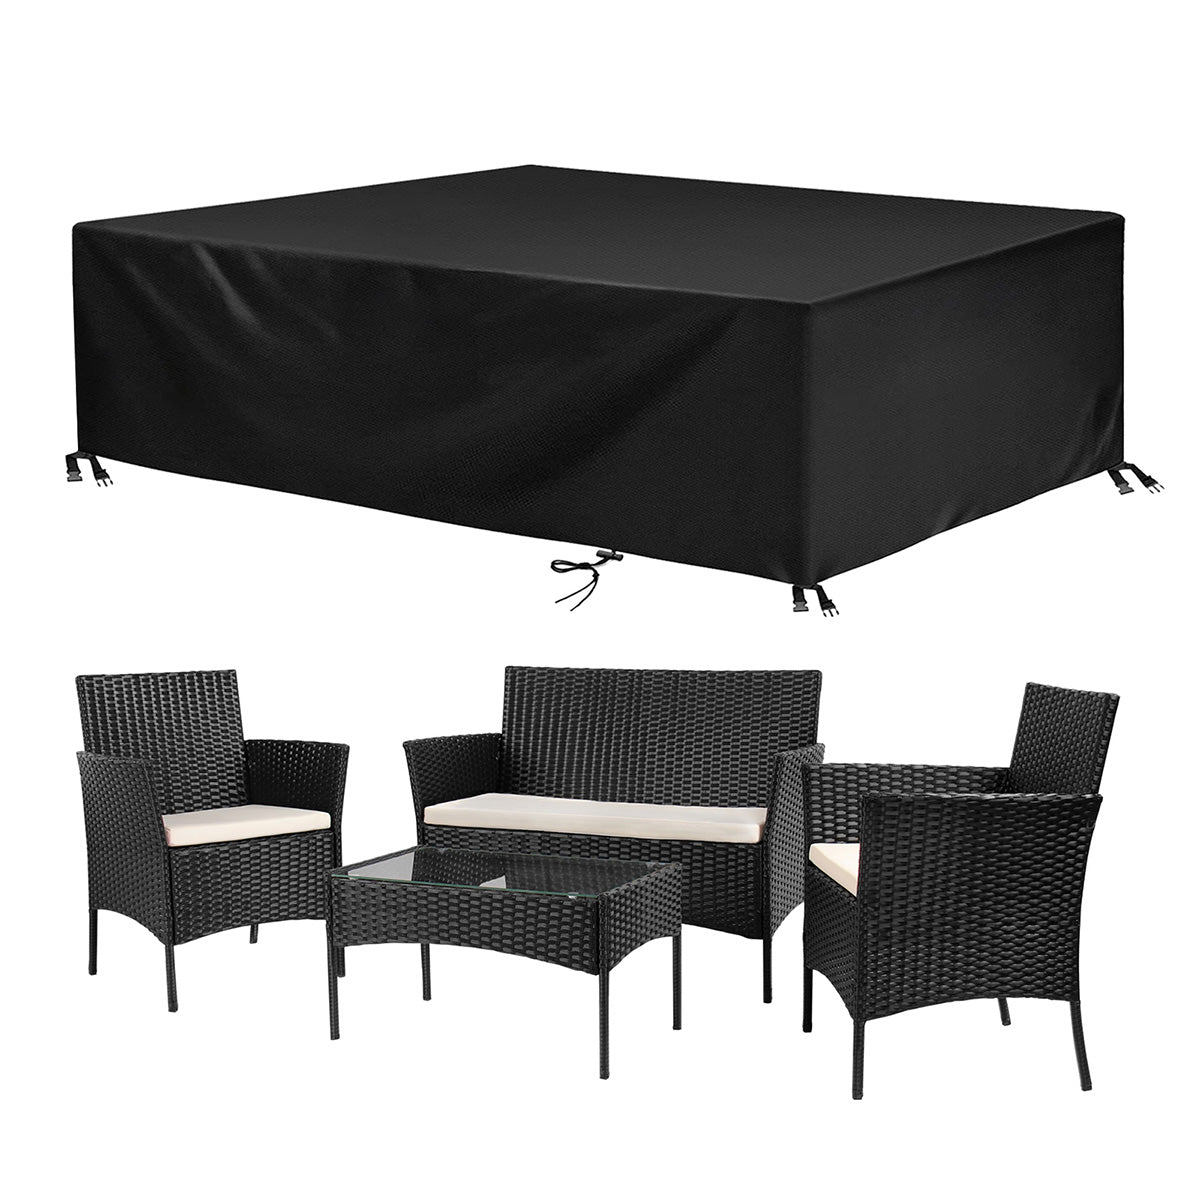 Image of 4-Seater Rattan Garden Furniture Patio Conversation Set Table Chairs, Black / With Cover